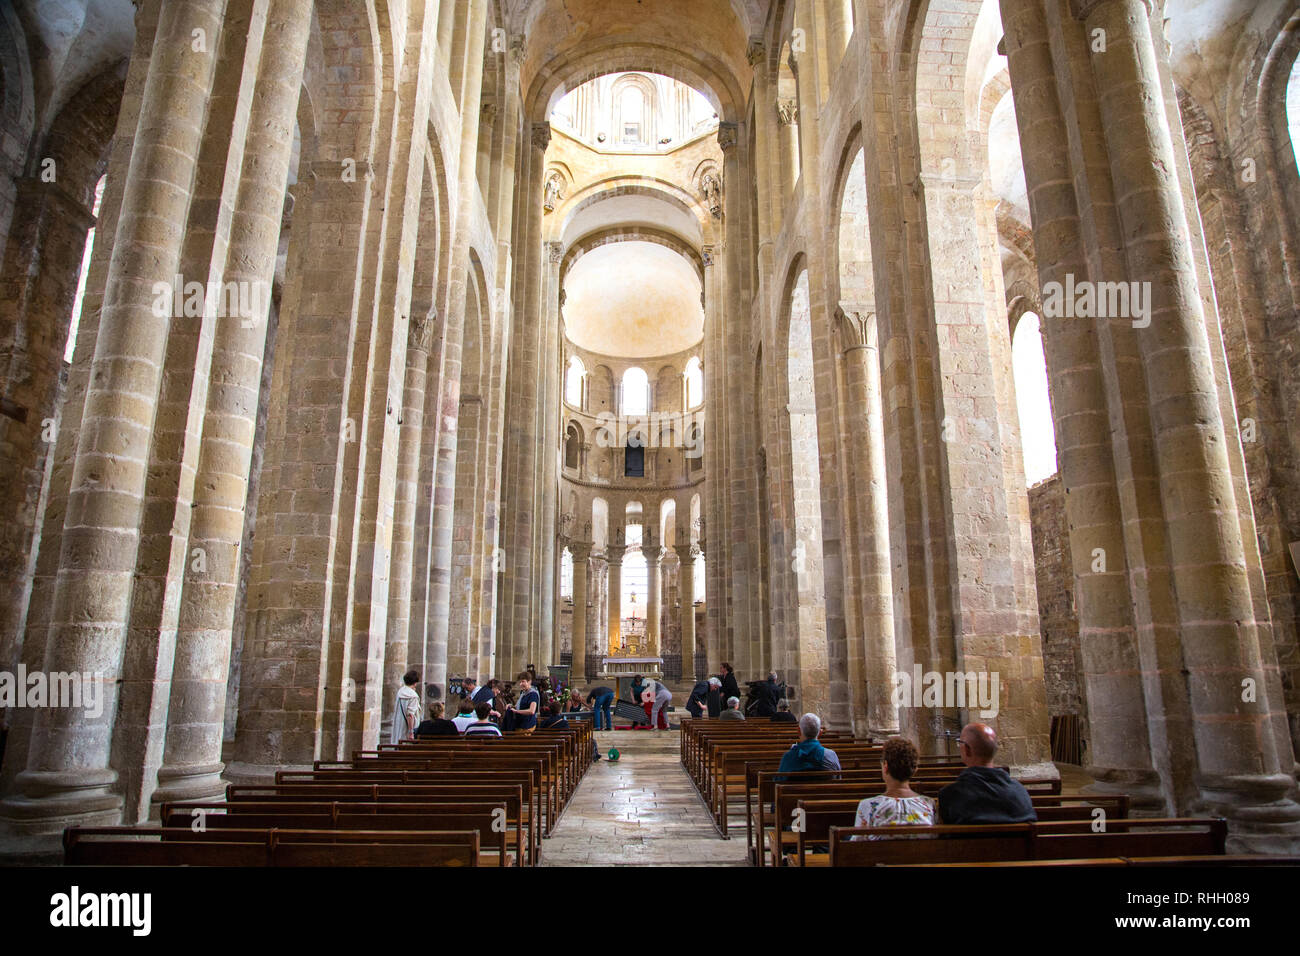 The Abbey Church of Conques France. Stock Photo